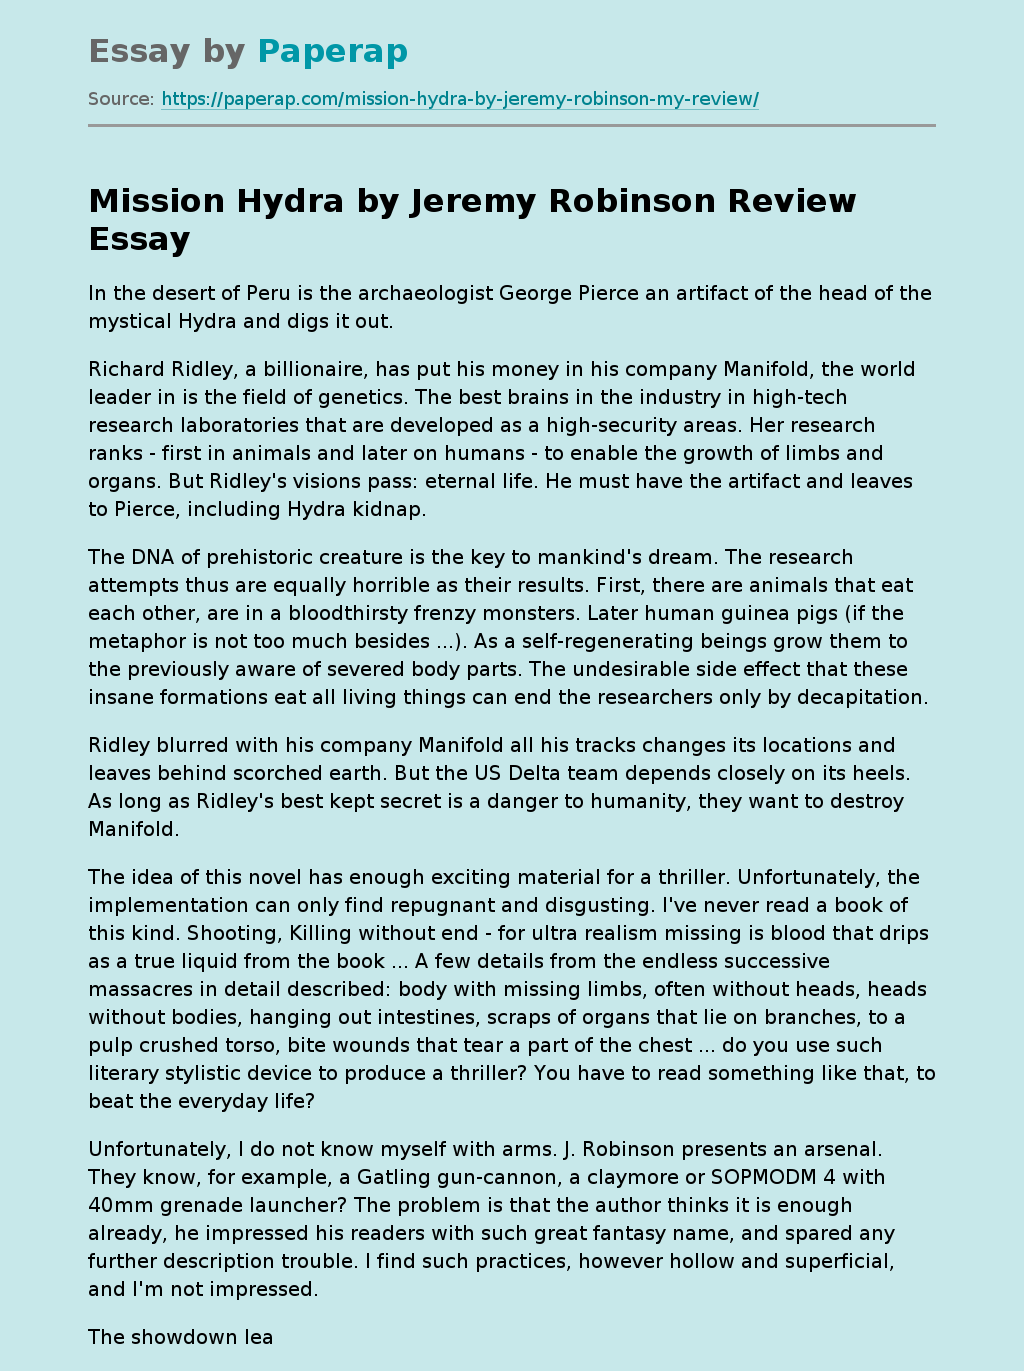 Mission Hydra by Jeremy Robinson Review